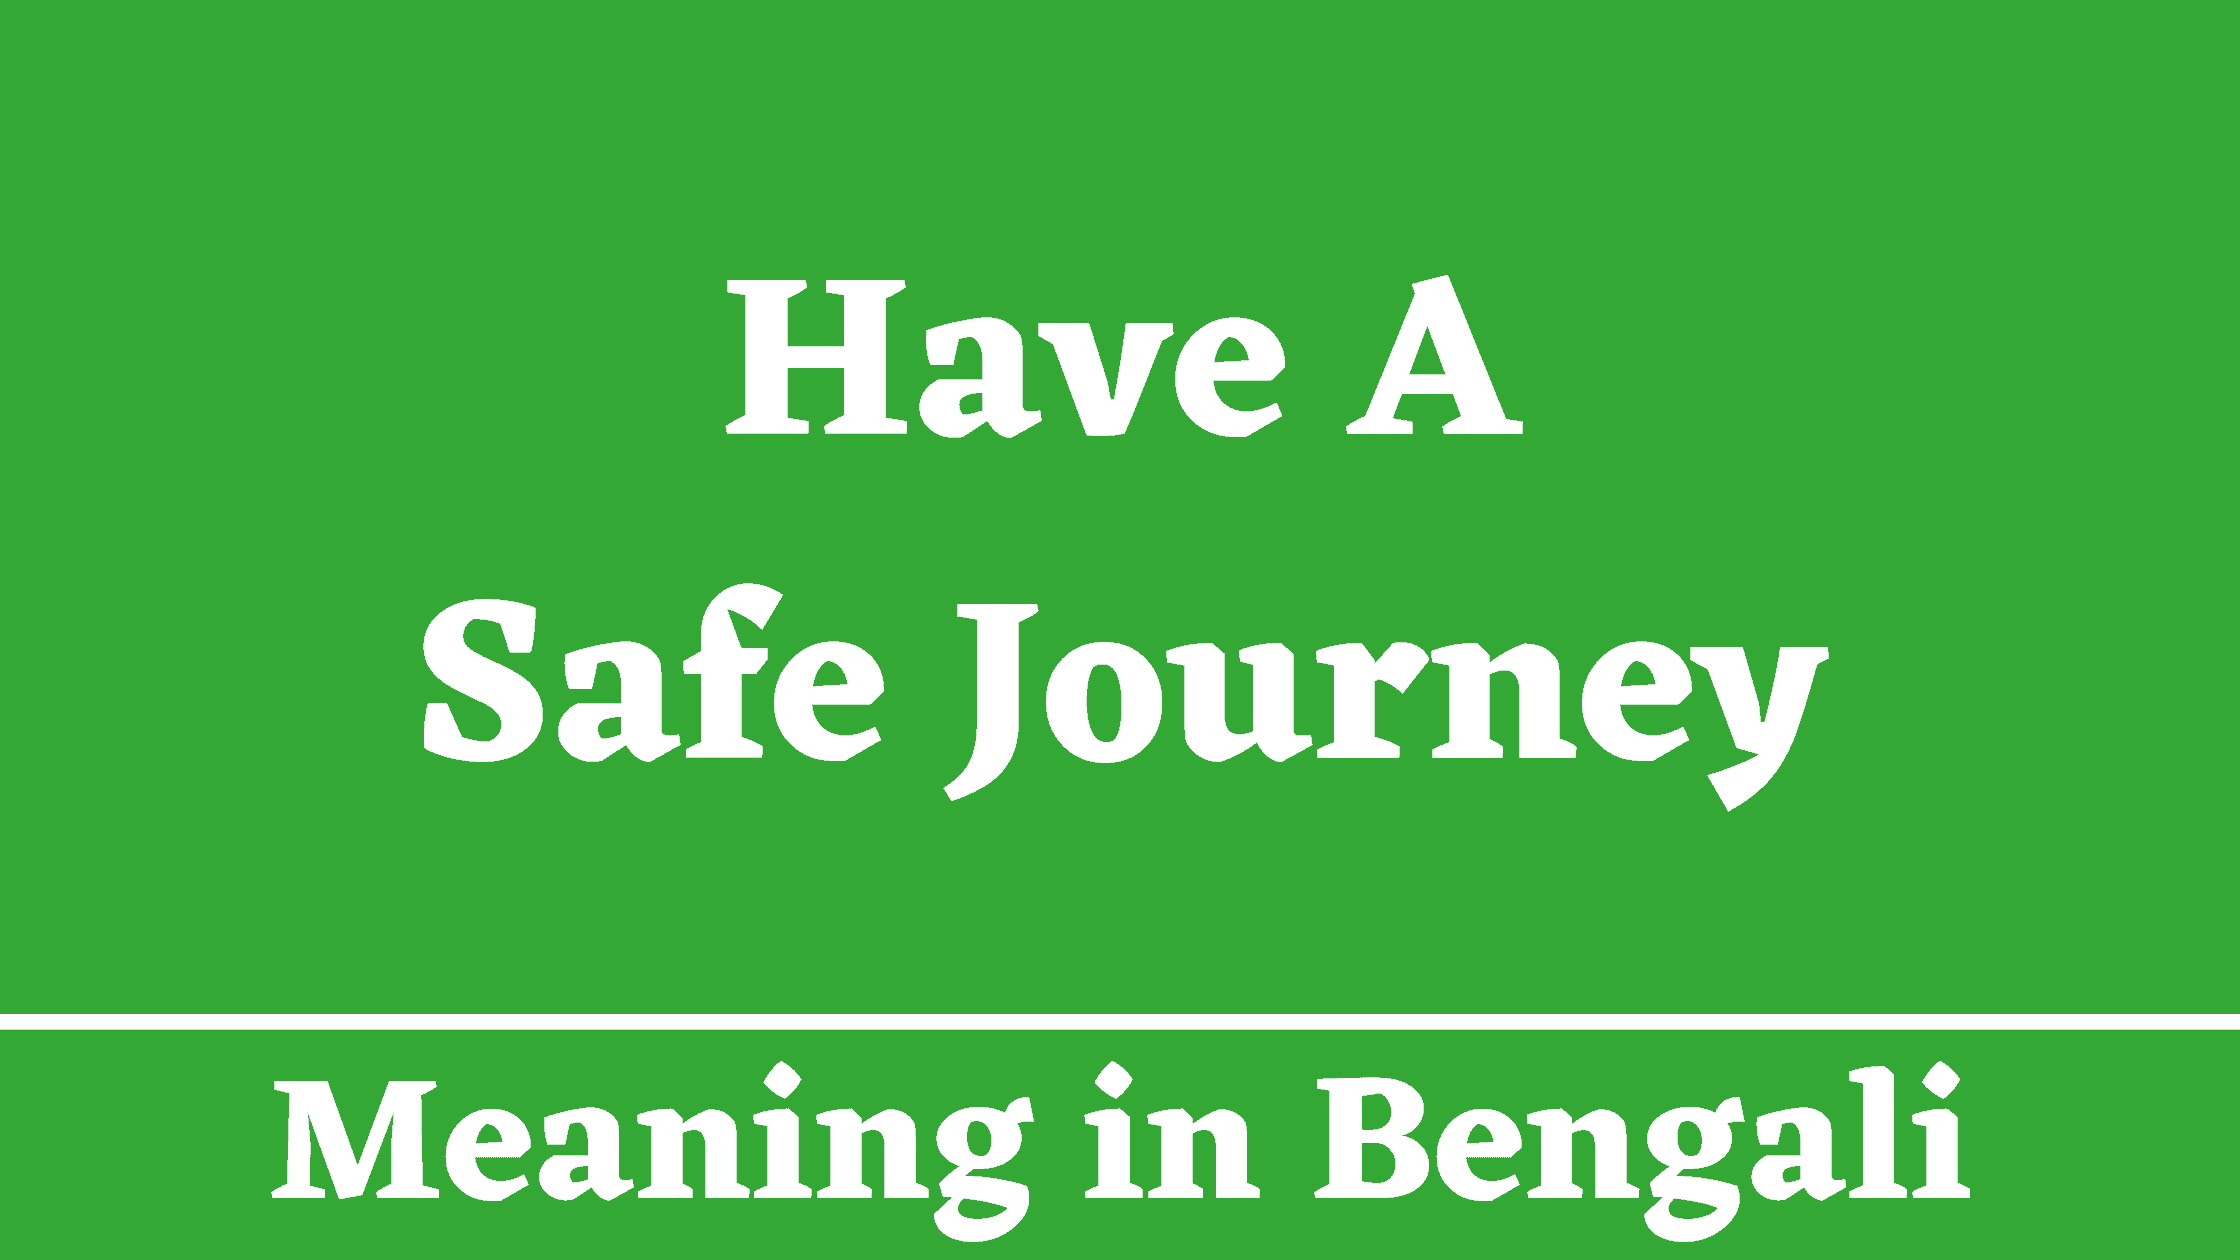 Have a Safe Journey Meaning in Bengali